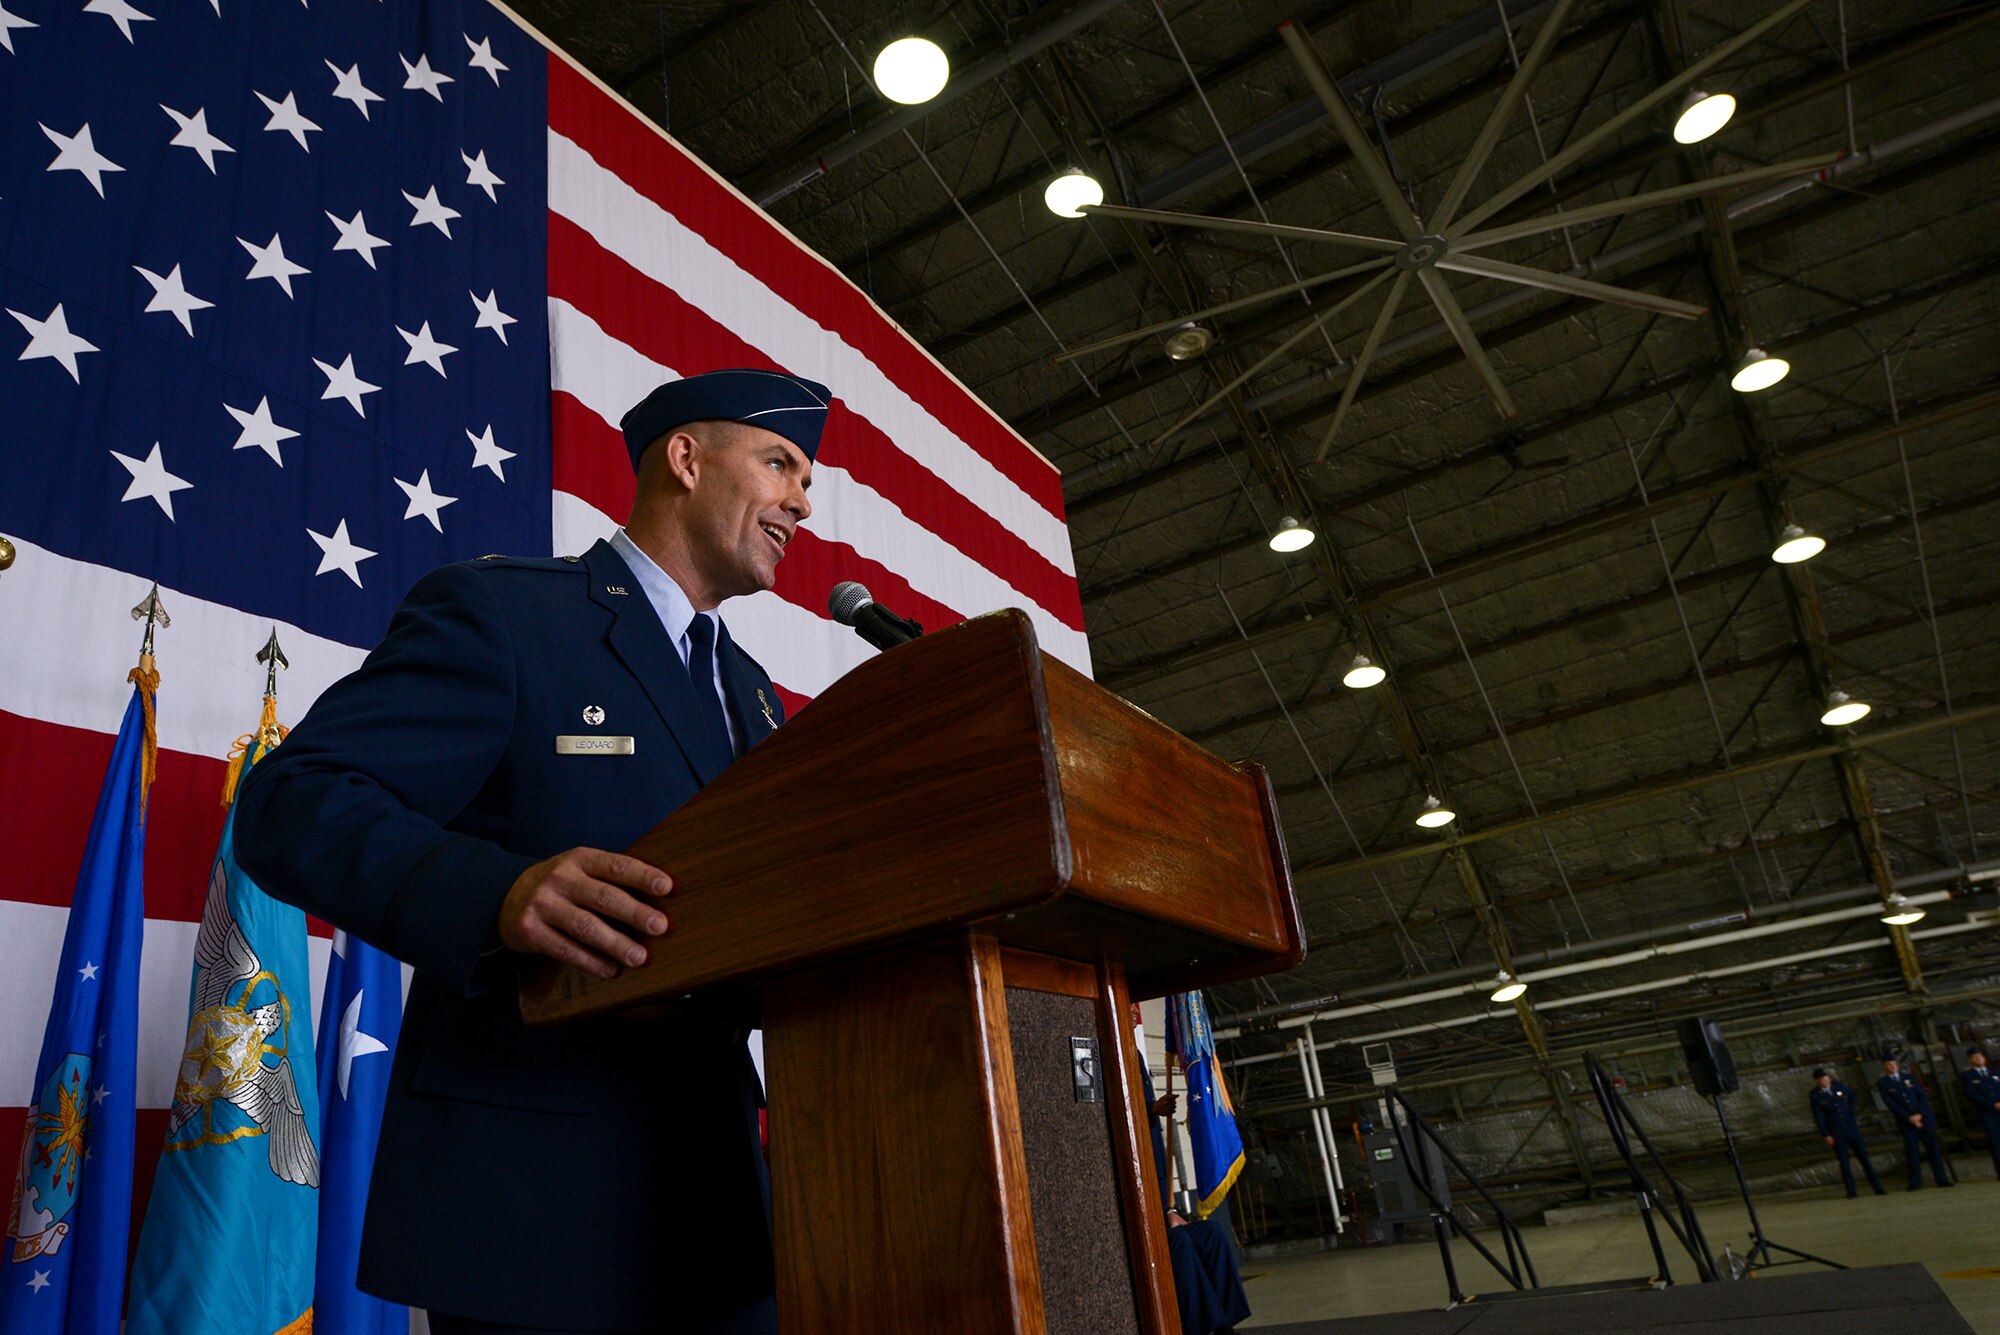 Col. Brook Leonard, outgoing 51st Fighter Wing commander, speaks to the audience at the 51st FW change of command ceremony June 16, 2015, at Osan Air Base, Republic of Korea. Leonard reflected on his two-year tour at Osan, and said teamwork is the only way for Airmen in the U.S. and ROK to continue to improve. (U.S. Air Force photo by Staff Sgt. Jake Barreiro/Released)